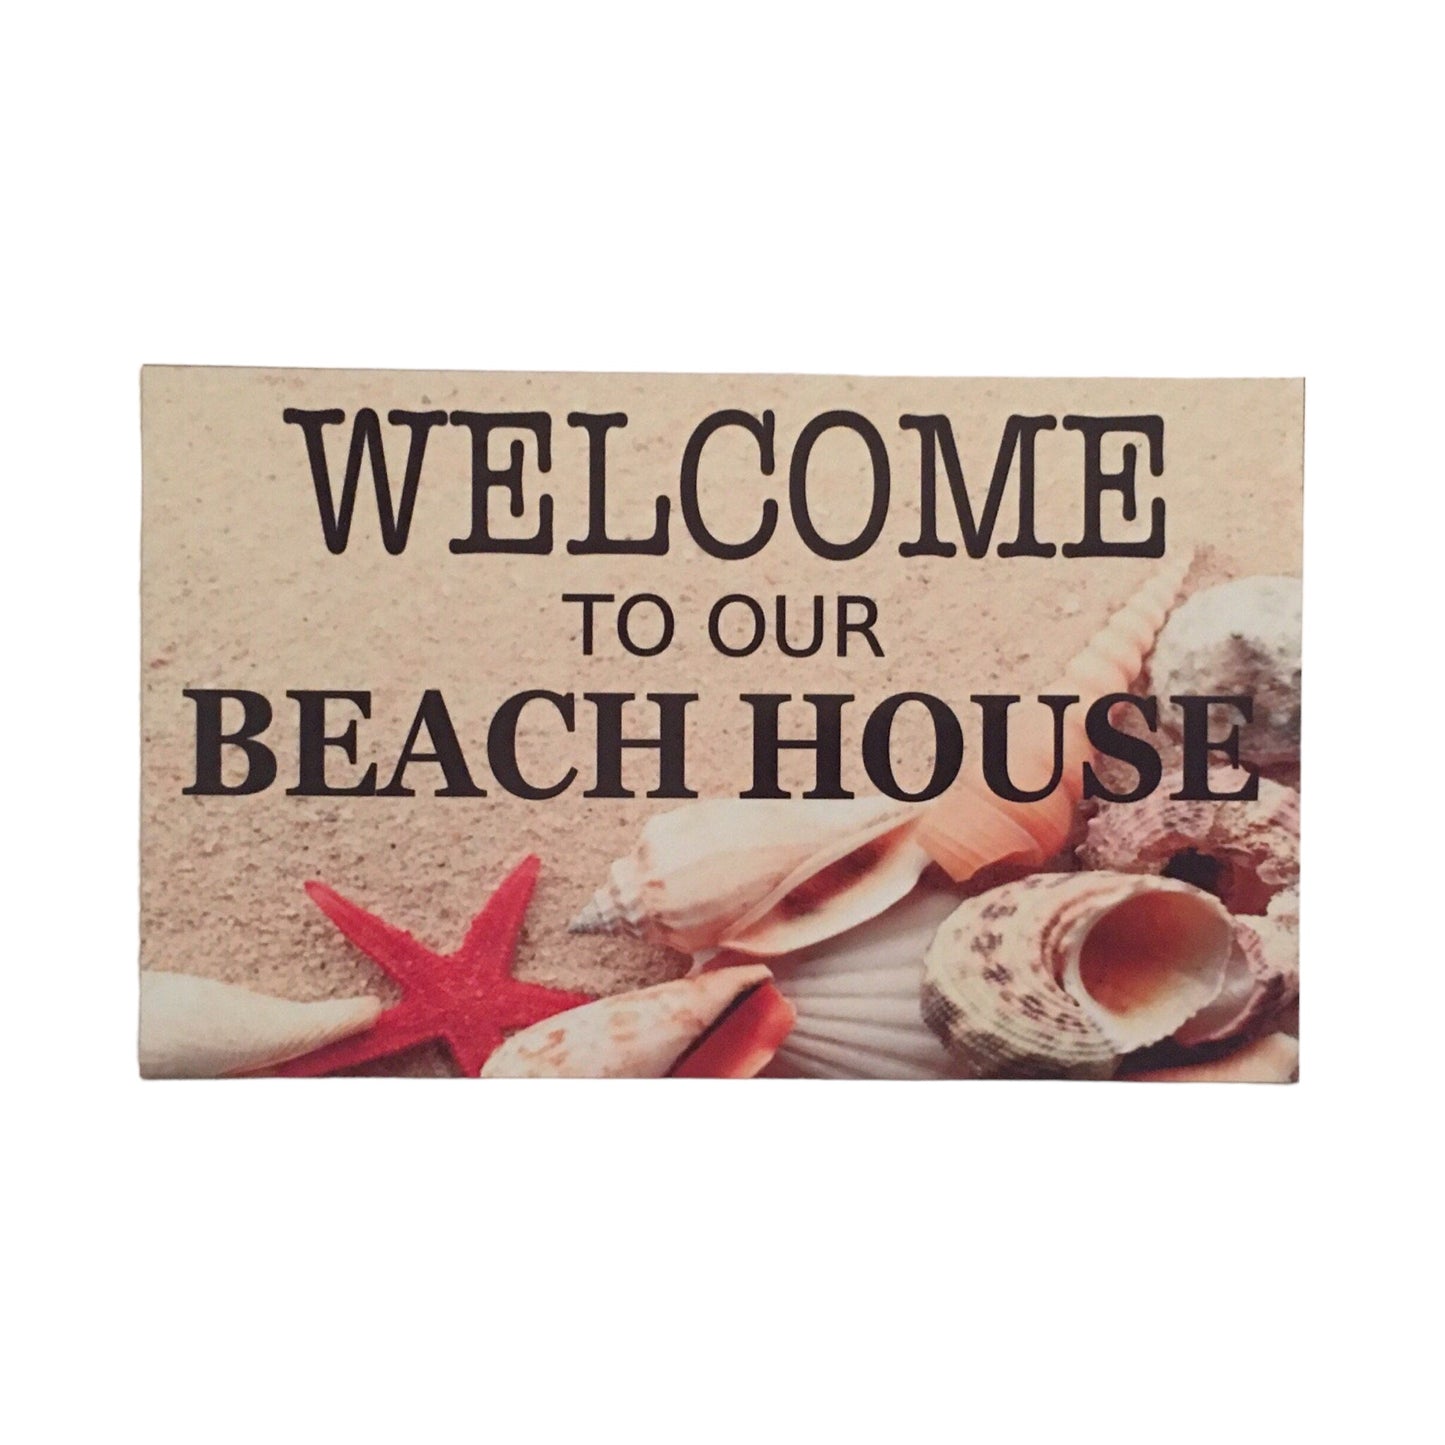 Welcome To Our Beach House Sign - The Renmy Store Homewares & Gifts 